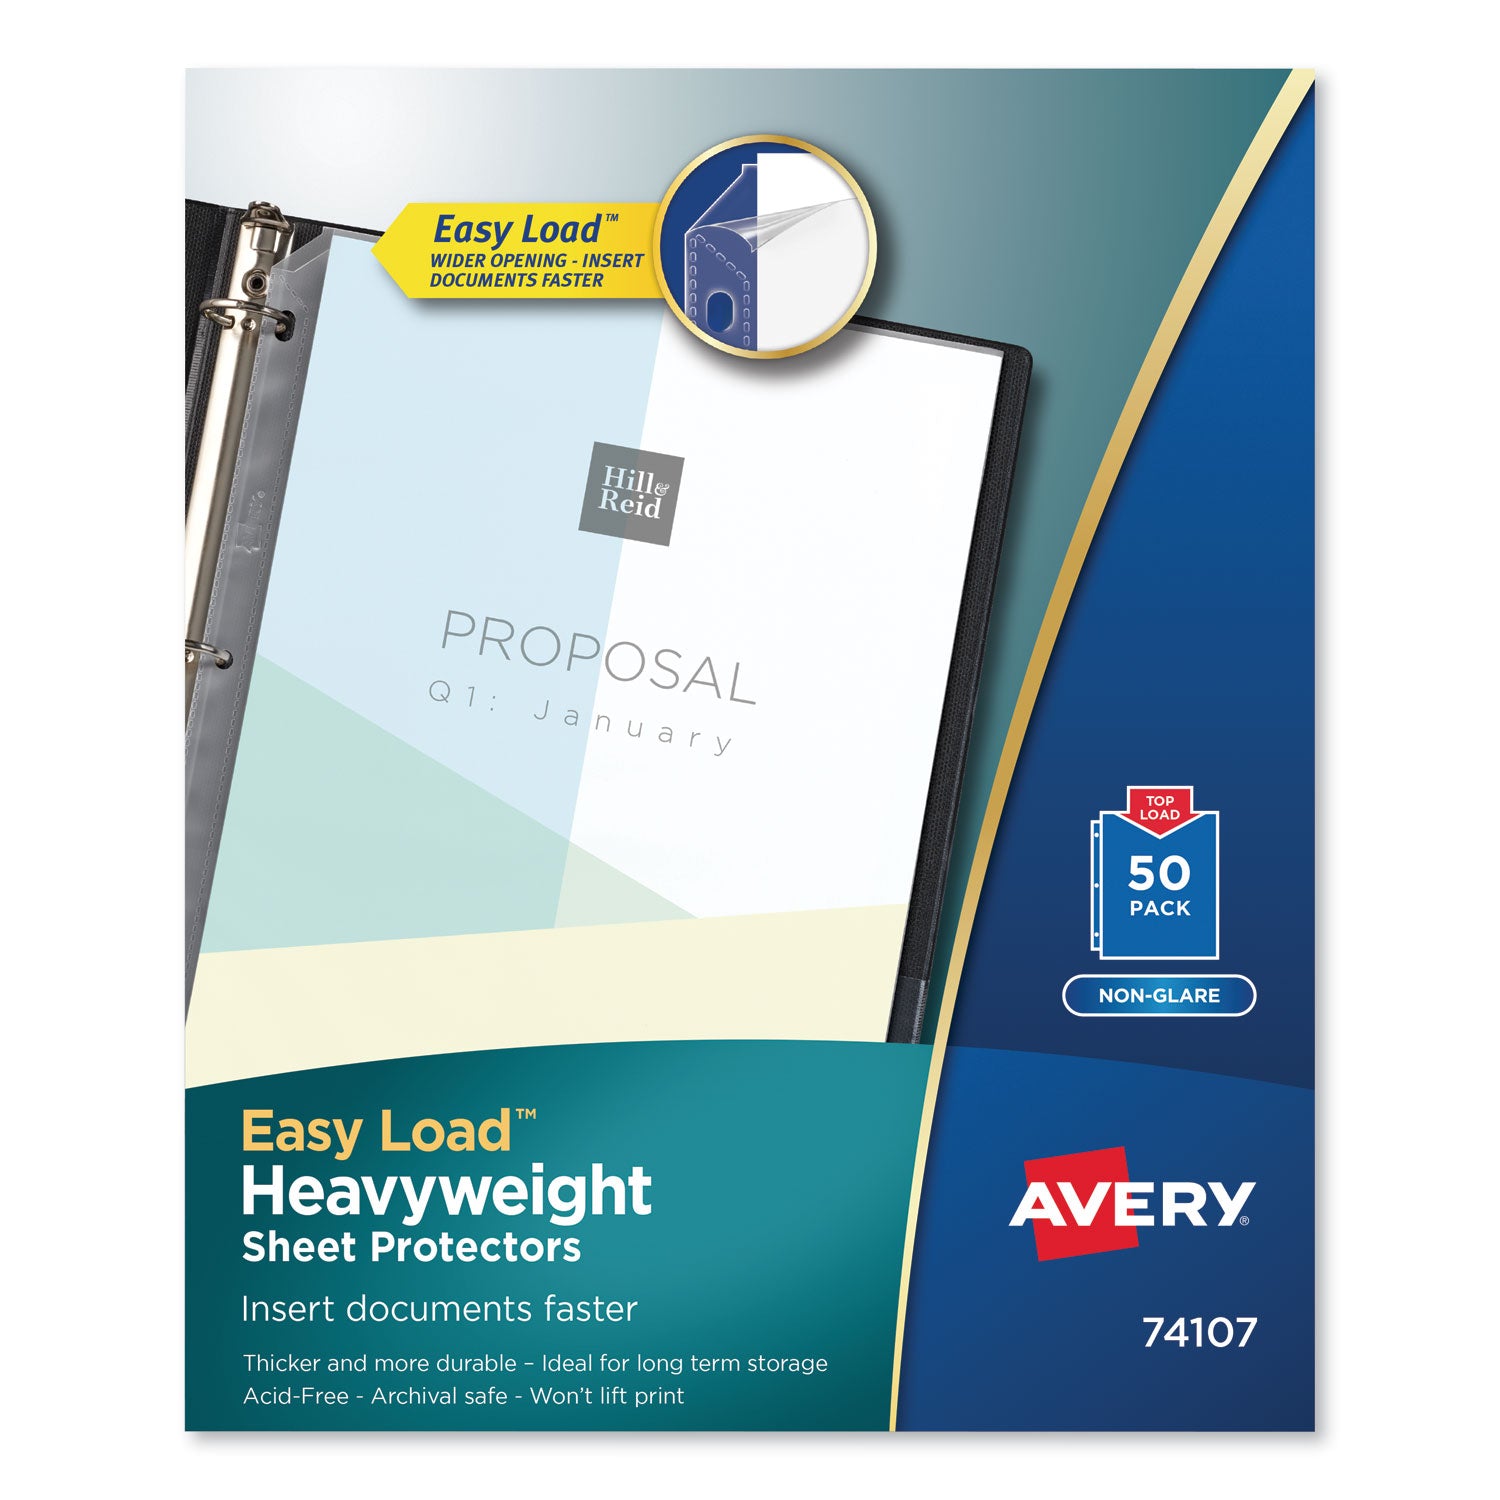 top-load-poly-sheet-protectors-heavy-gauge-letter-nonglare-50-box_ave74107 - 1